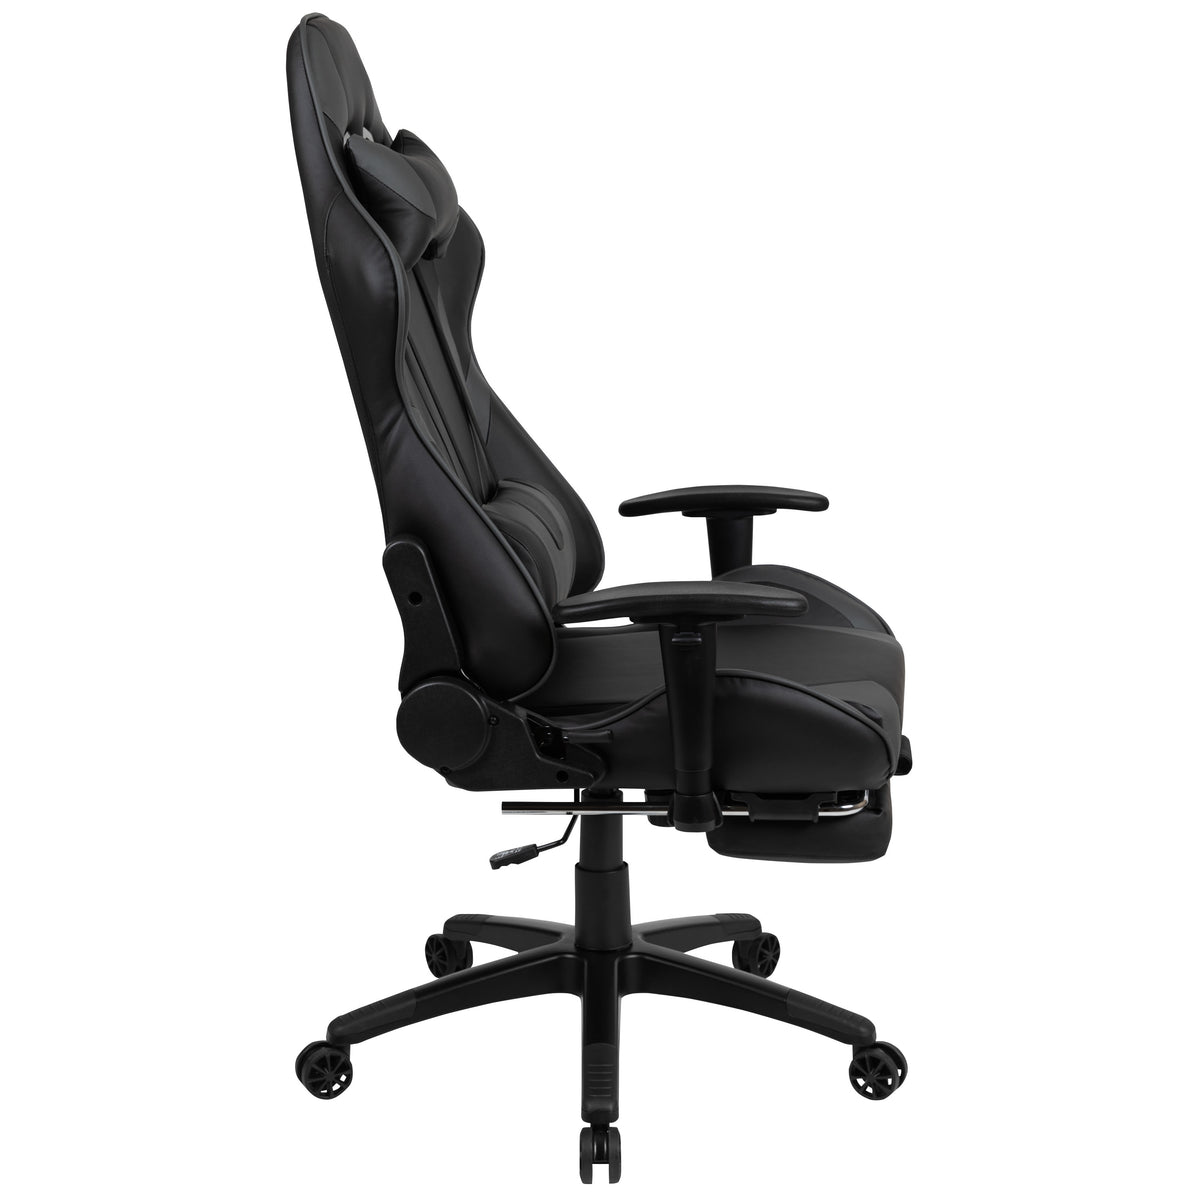 Gray |#| Reclining Faux Leather Gaming Chair - Adjustable Arms & Footrest - Black & Gray